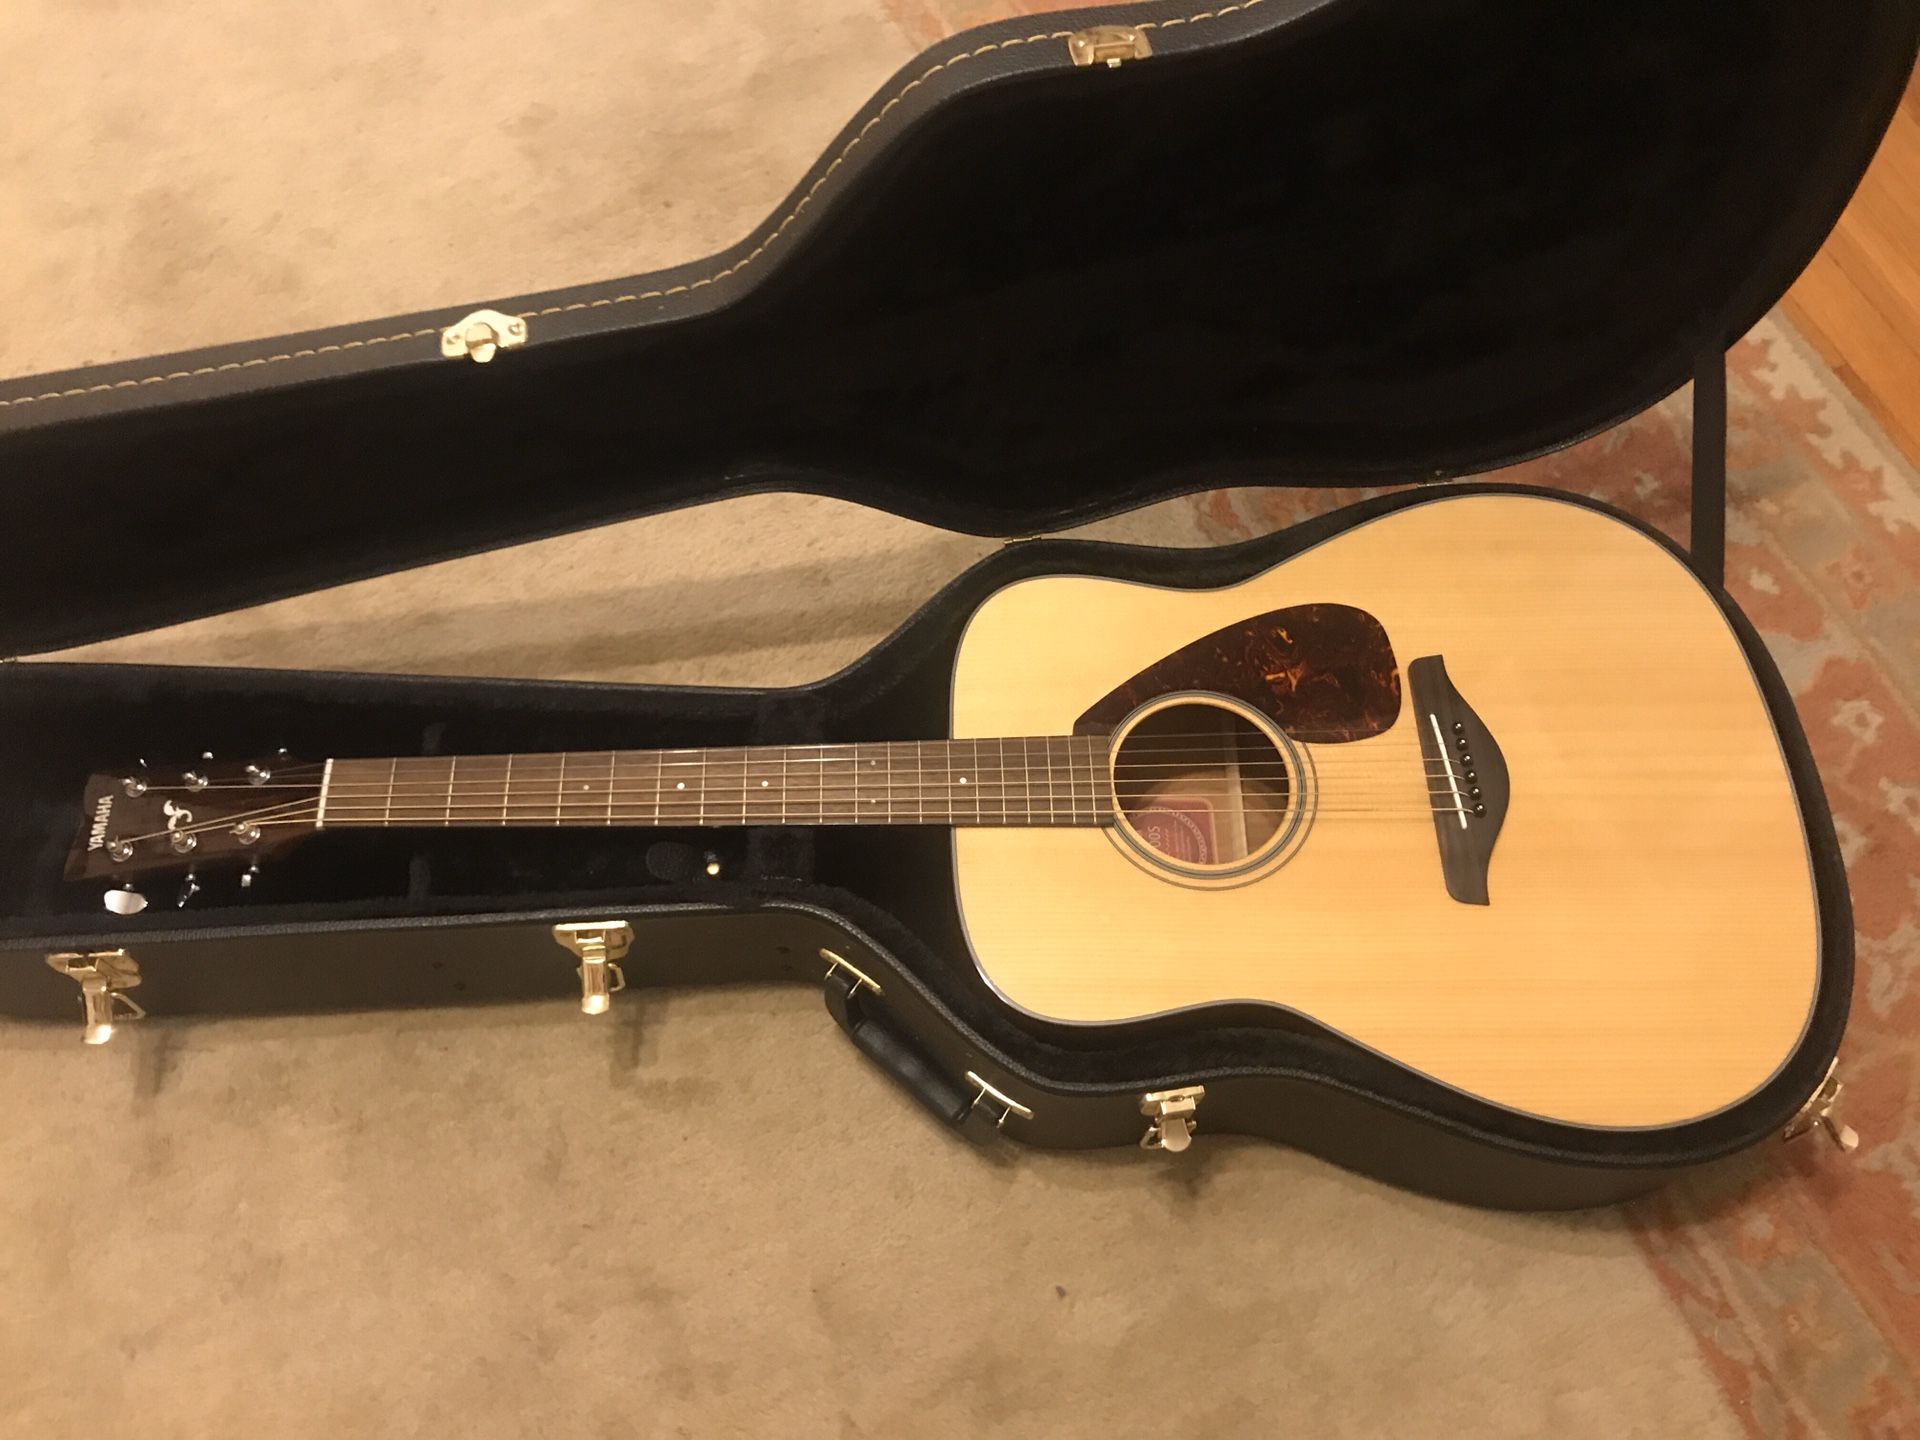 Yahama acoustic guitar (FG700S) with Hard Case